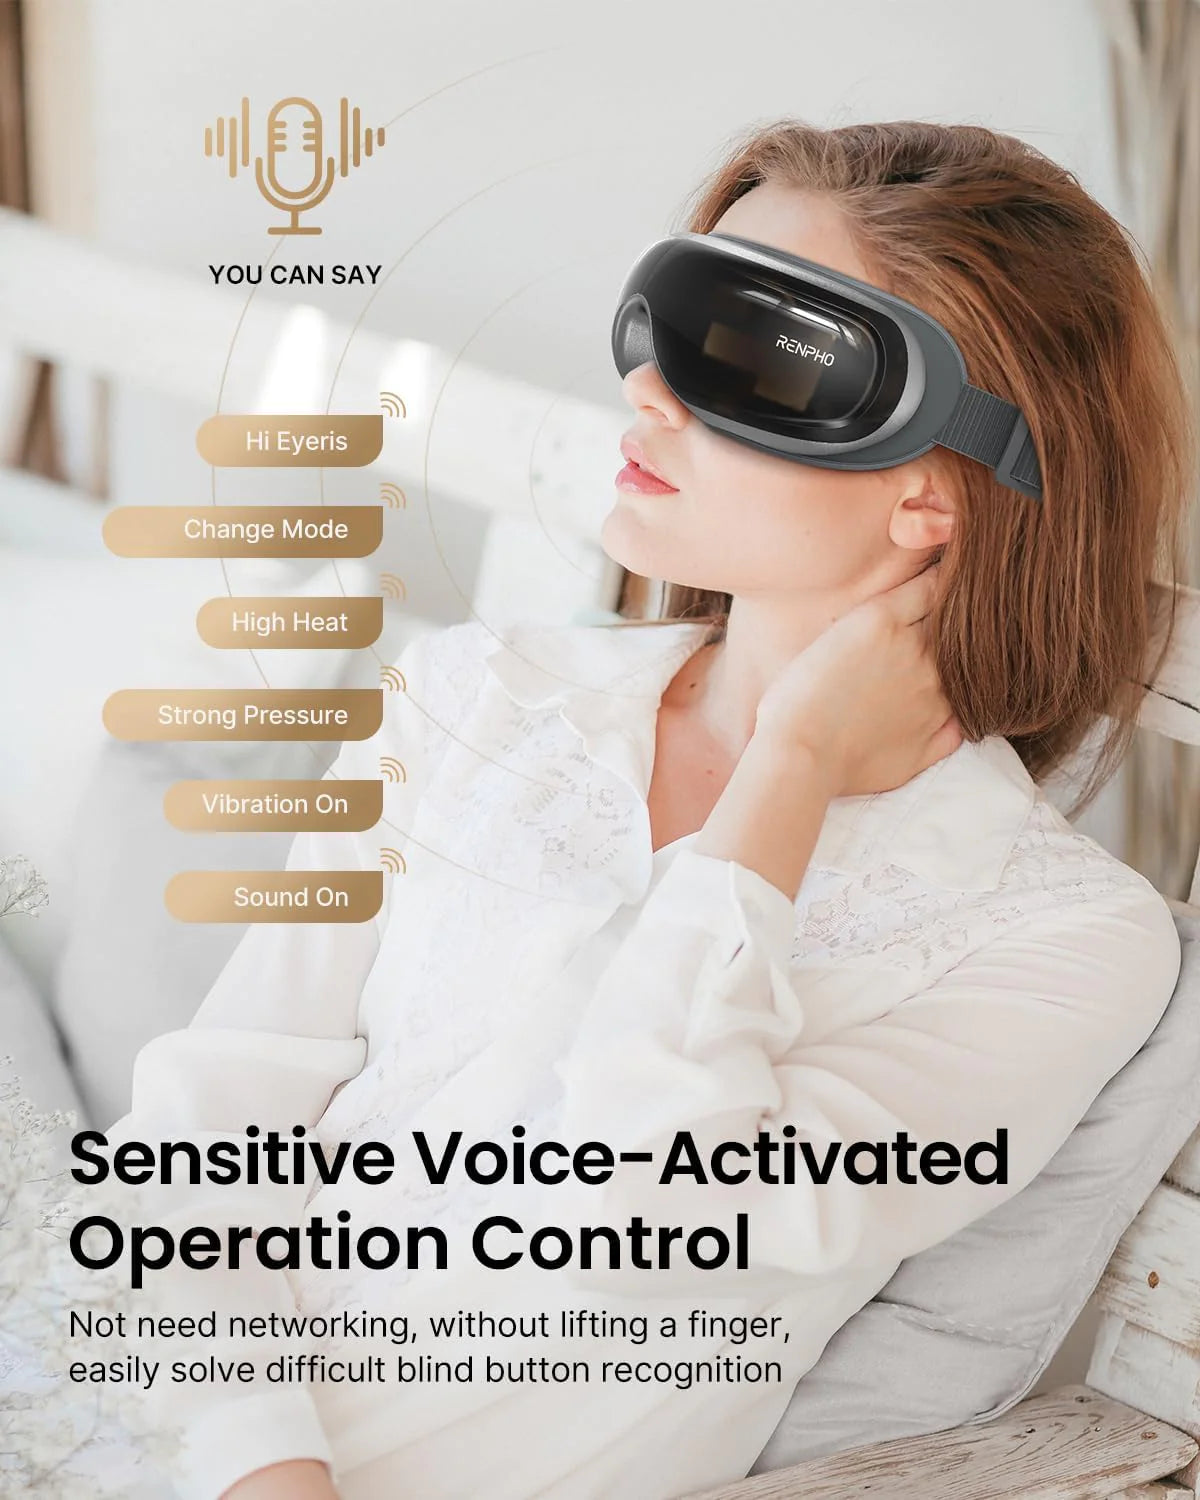 A woman wearing a white blouse is using a black and grey Renpho EU Eyeris 3 Eye Massager. Above her head are icons and text representing voice commands such as "Hi Eyeris," "Change Mode," and "High Heat." This personalized eye care provides hands-free control, ensuring ultimate convenience. Below is text about voice-activated operation control.